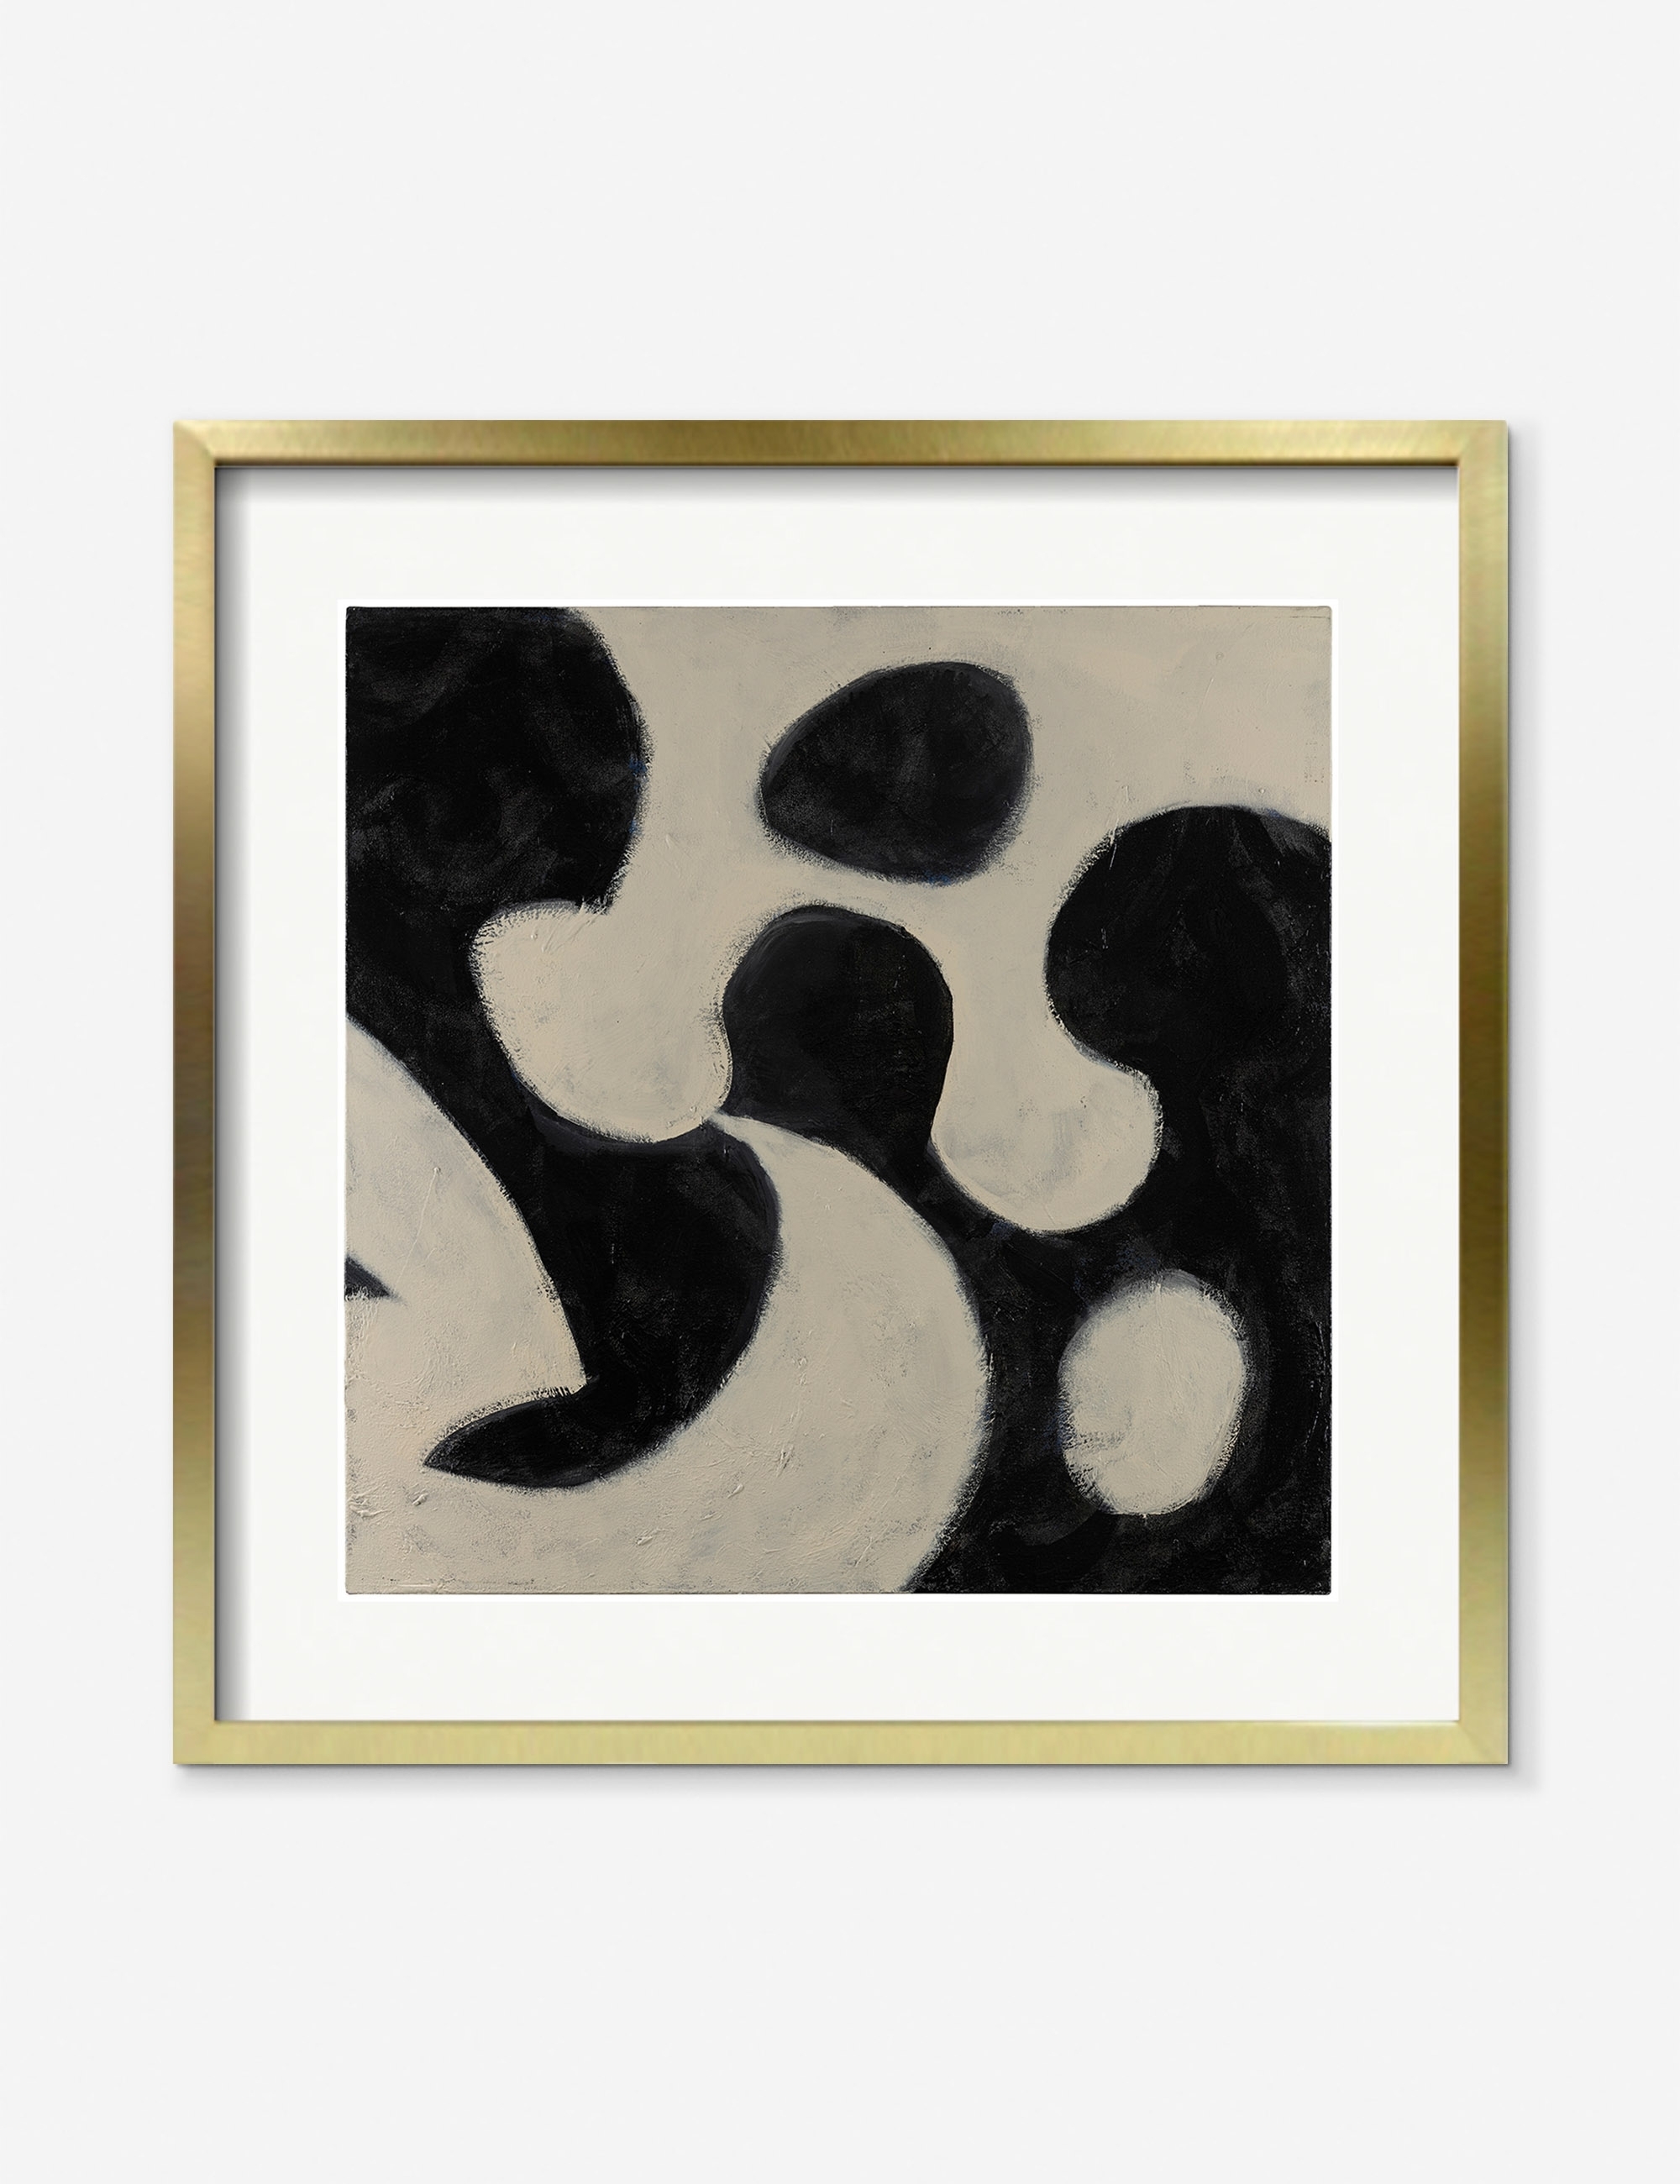 Shapes 2 Print by Francis Poirot - Image 2